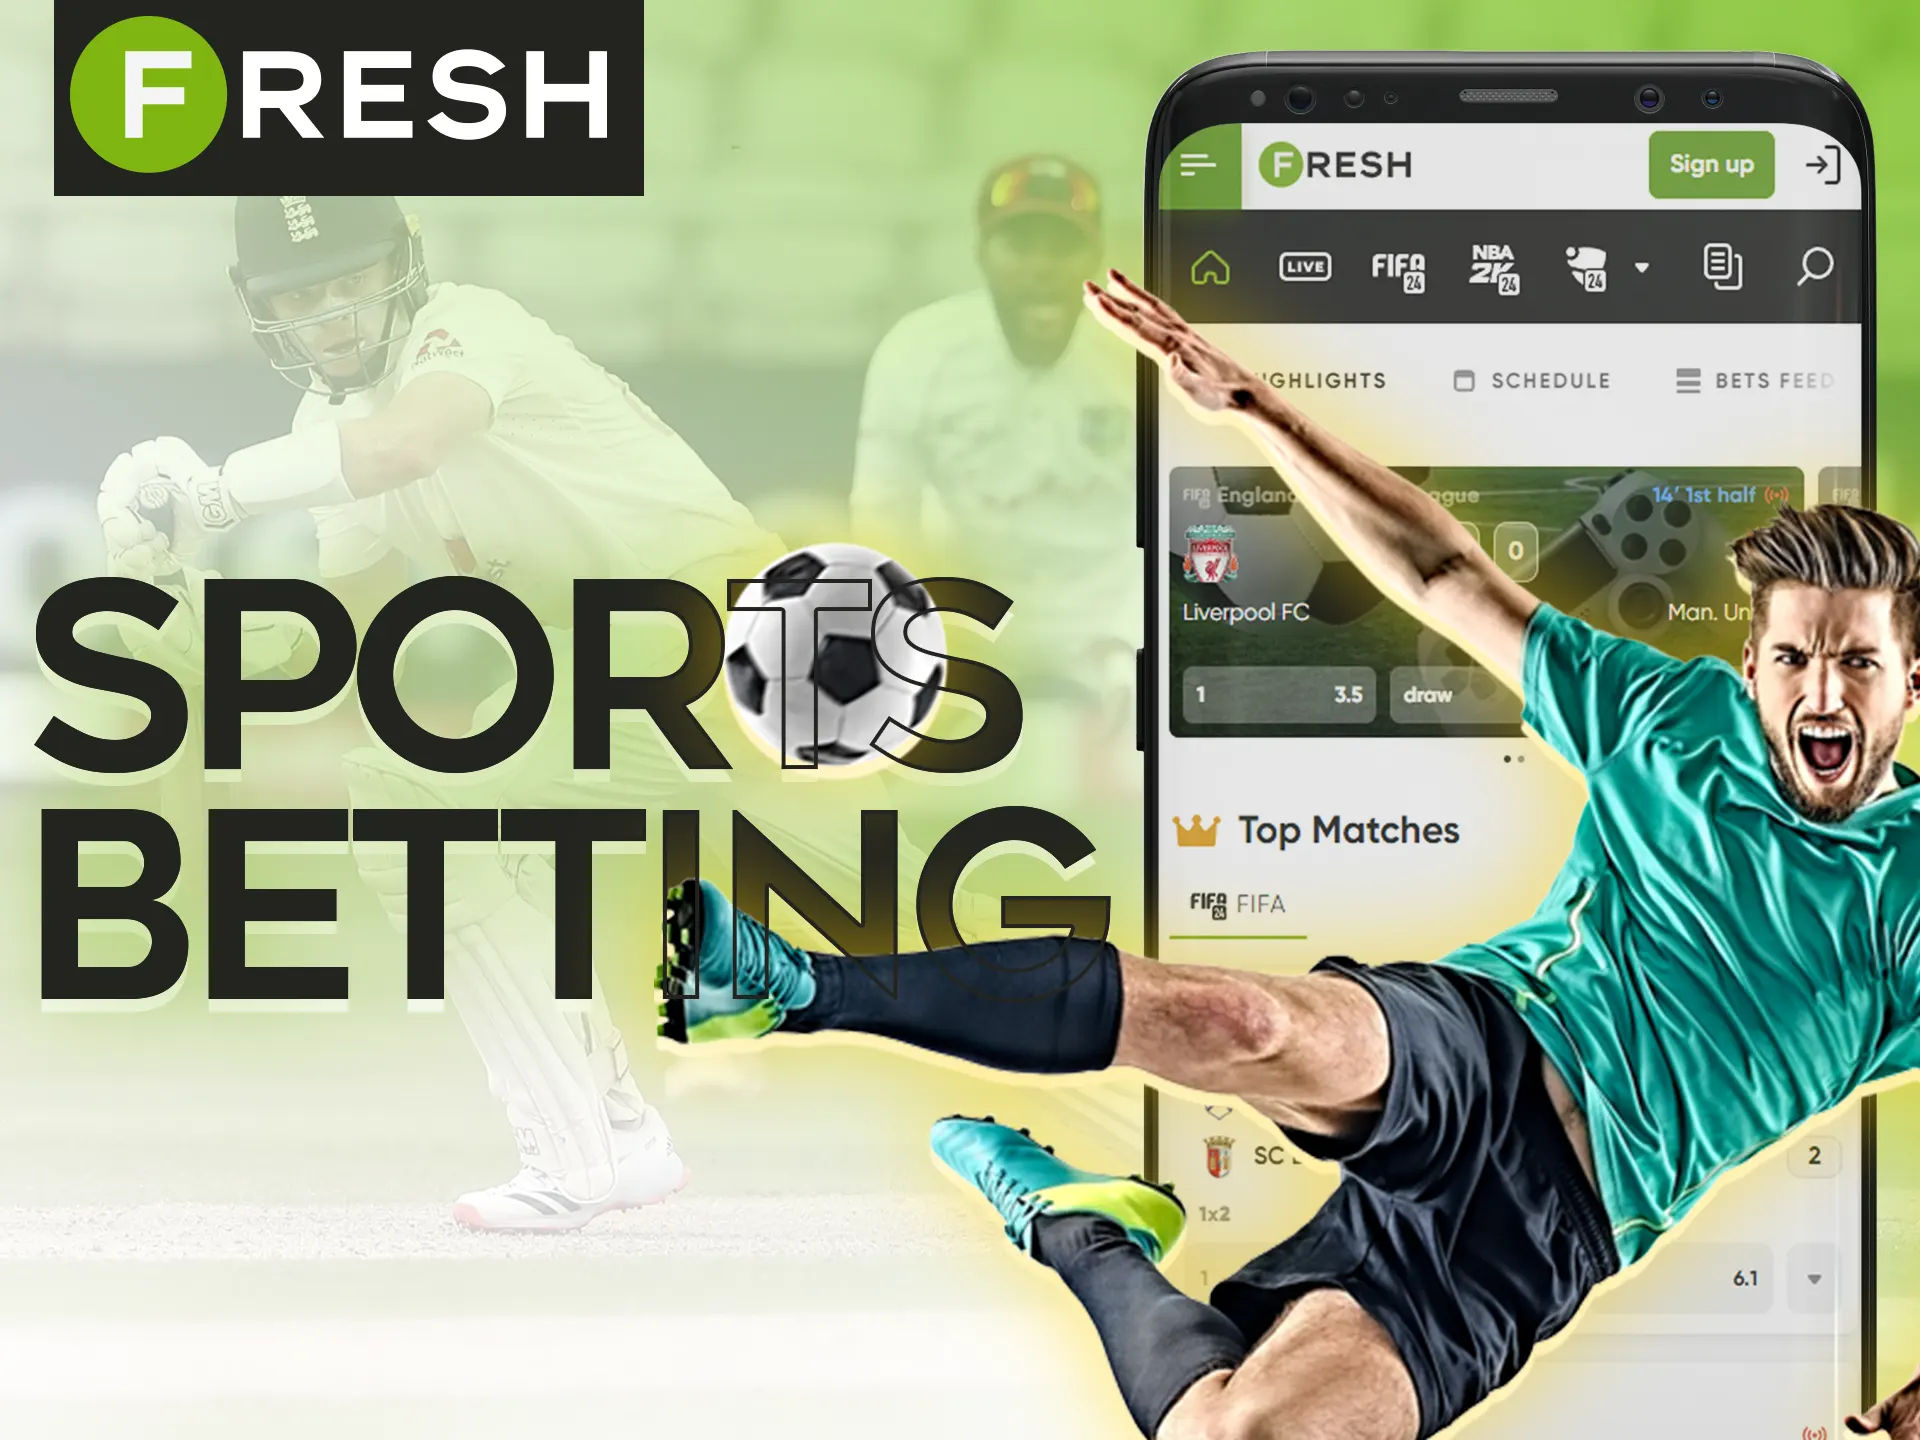 Bet on your favorite sports quicker with the Fresh Casino app.